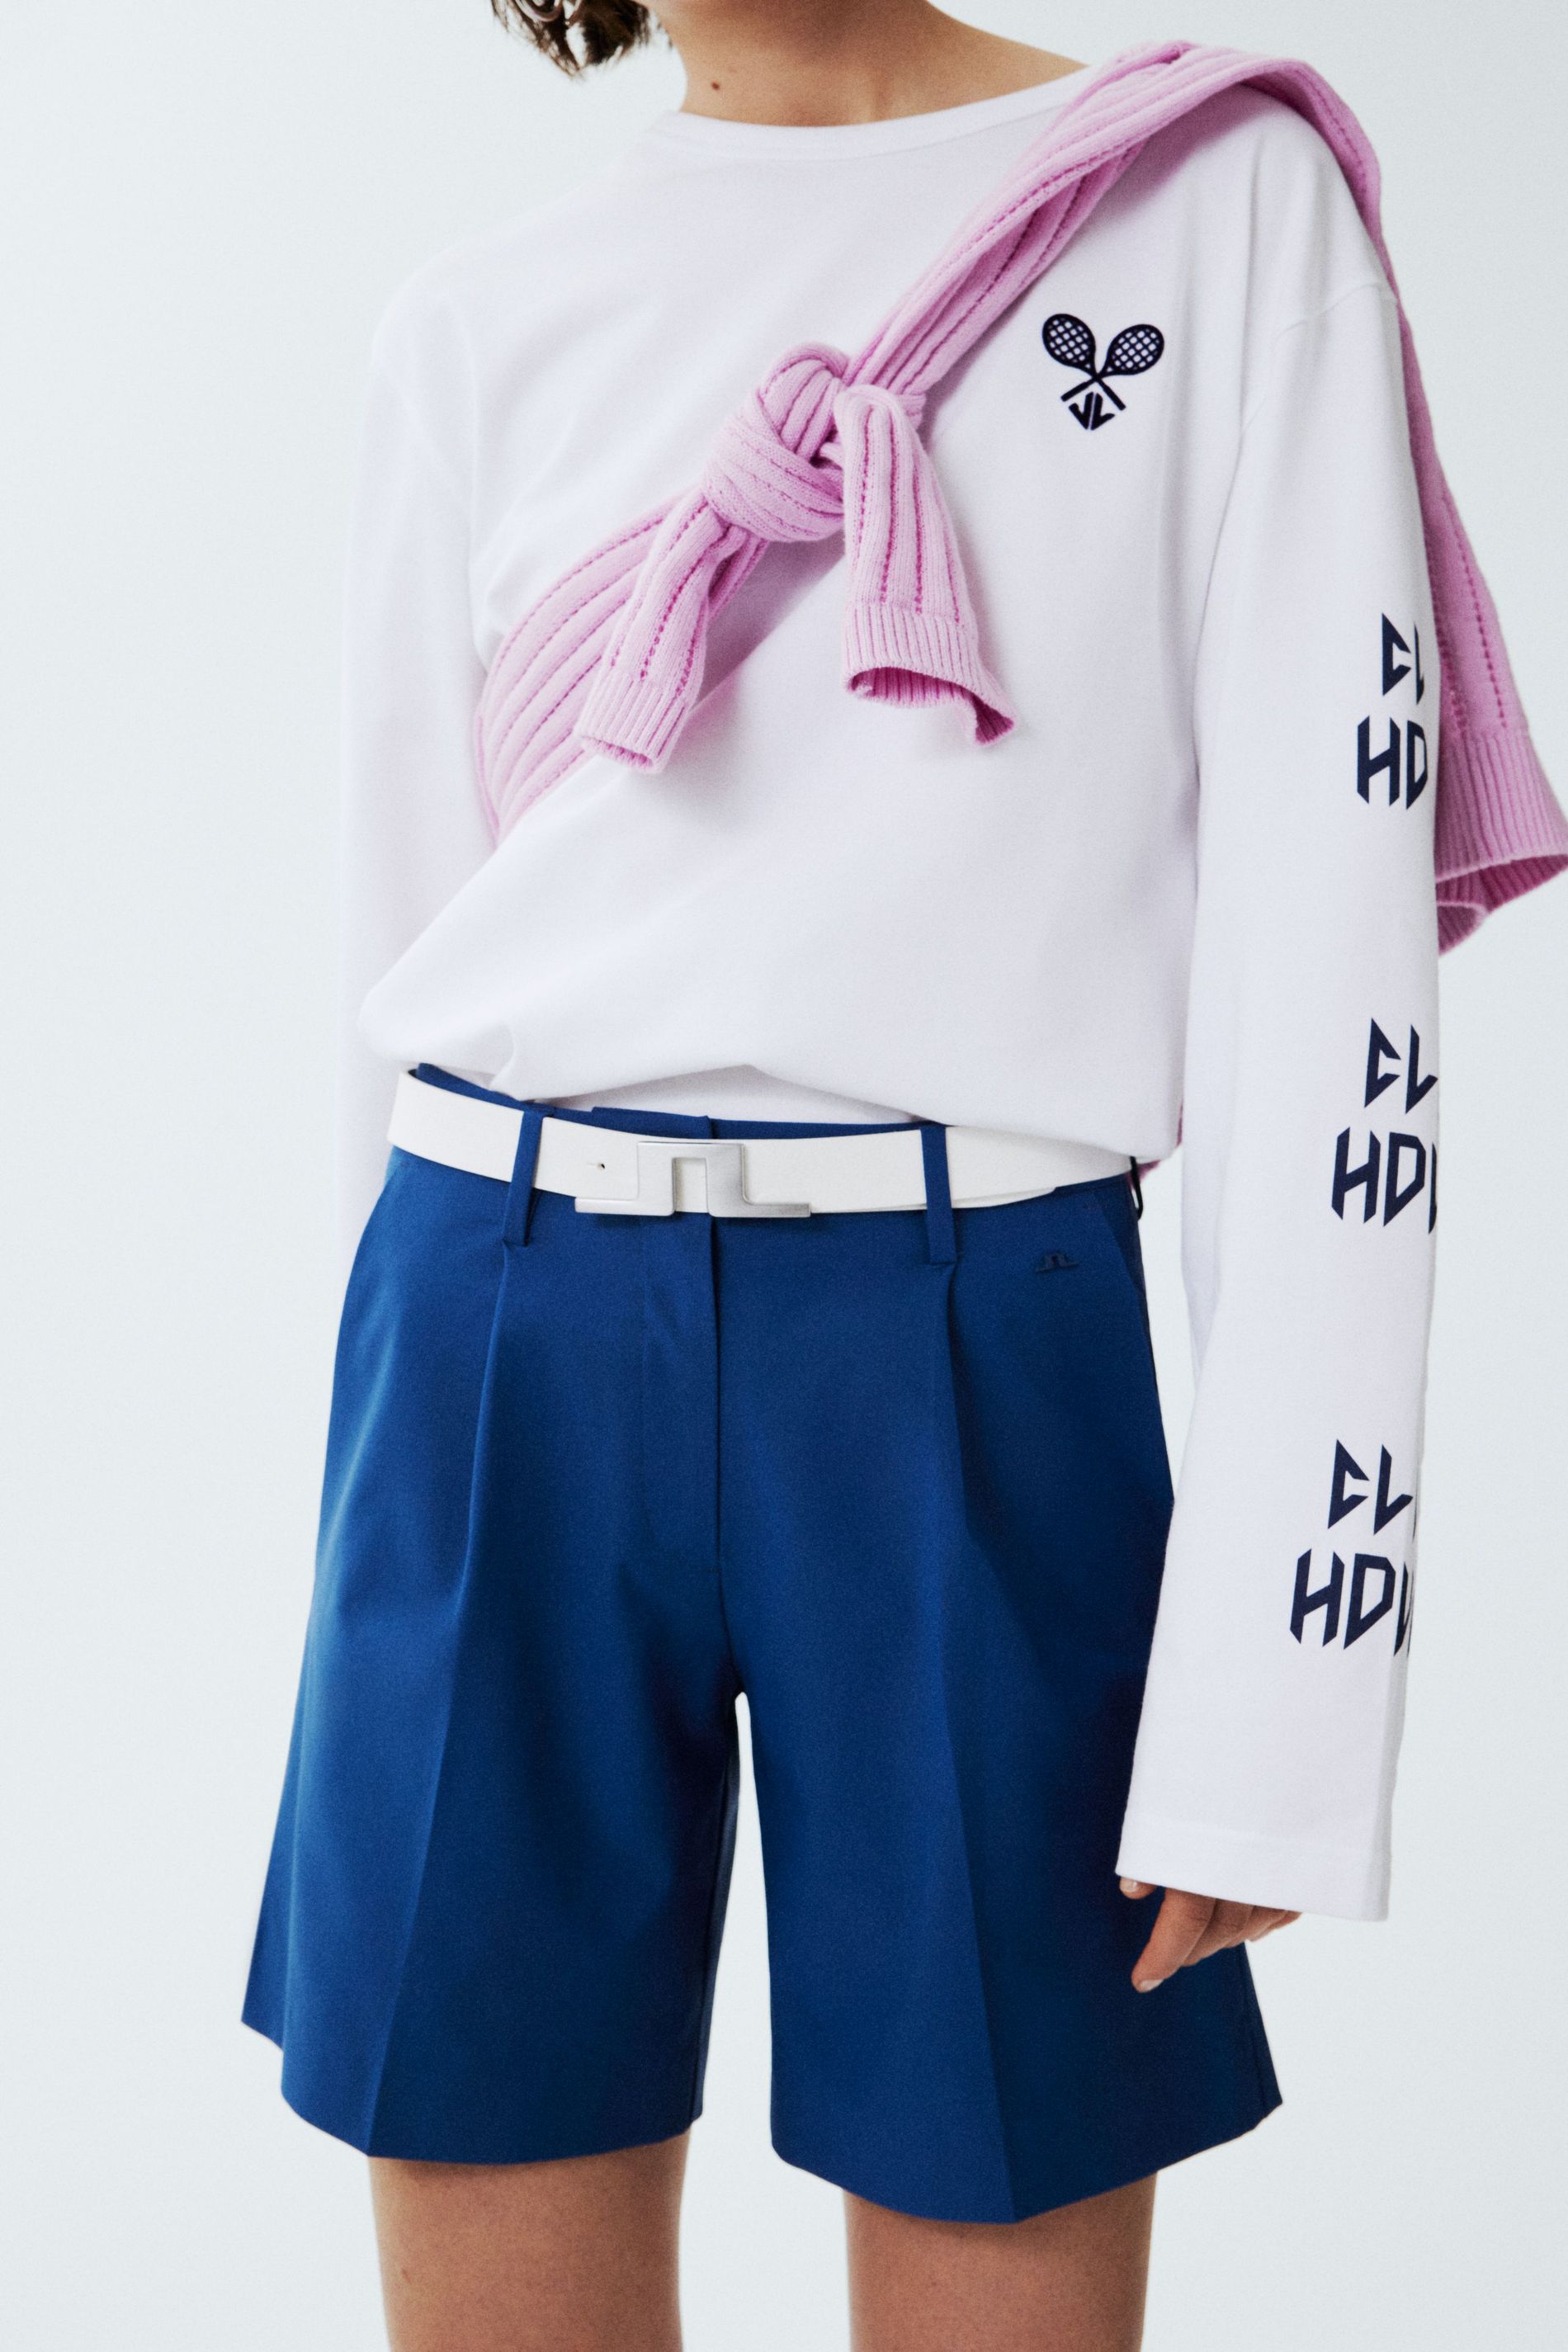 A white crew neck top and navy shorts from J.Lindeberg's Tennis 2024 collection